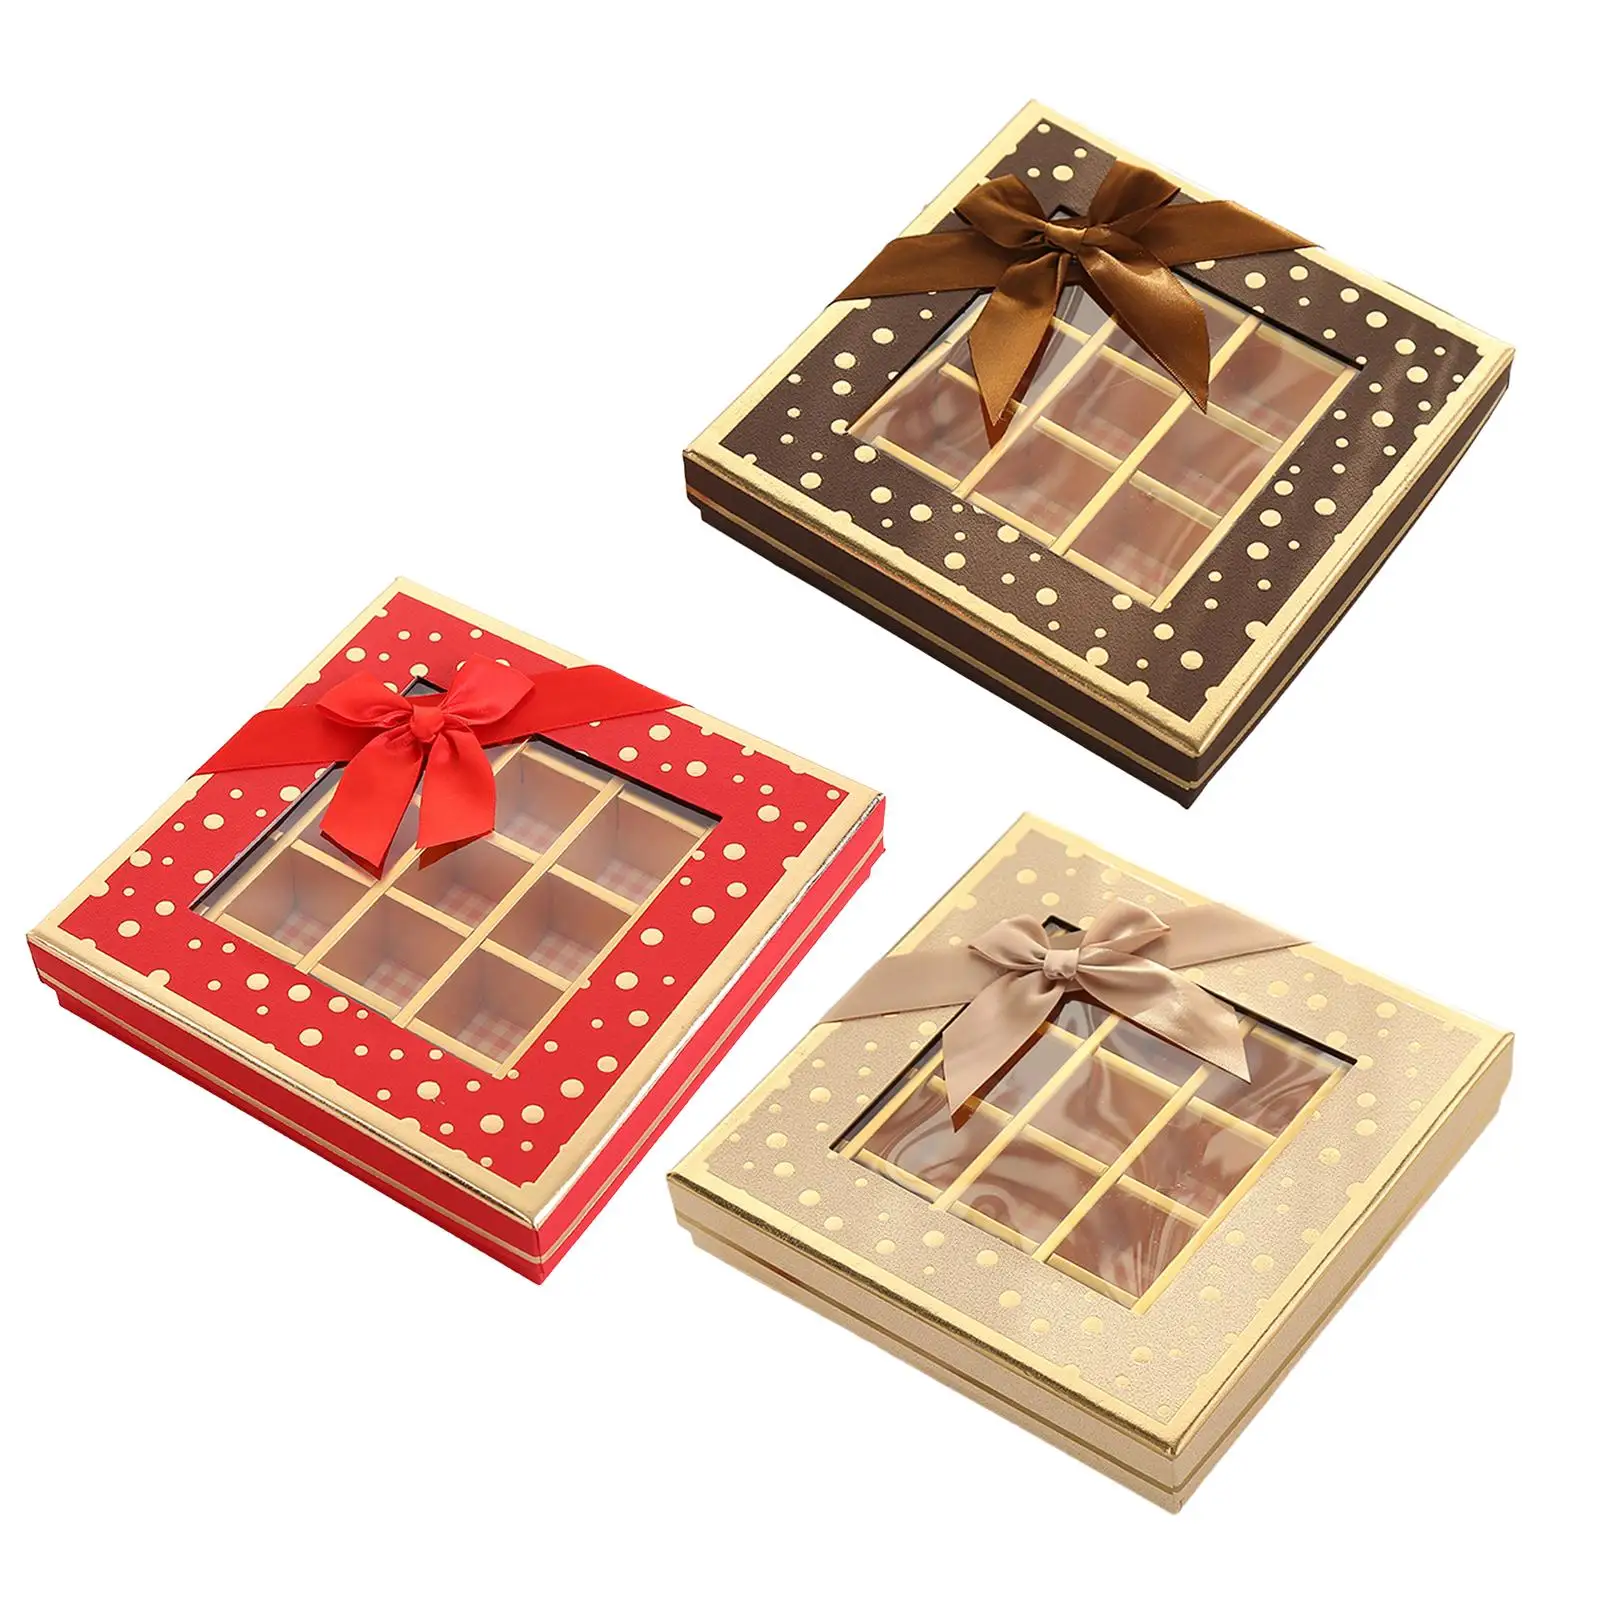 Chocolate Box 25 Inner Grids Valentines Day Gift Box for Girlfriend Boyfriend Family Members Wife Husband Wedding Party Supplies